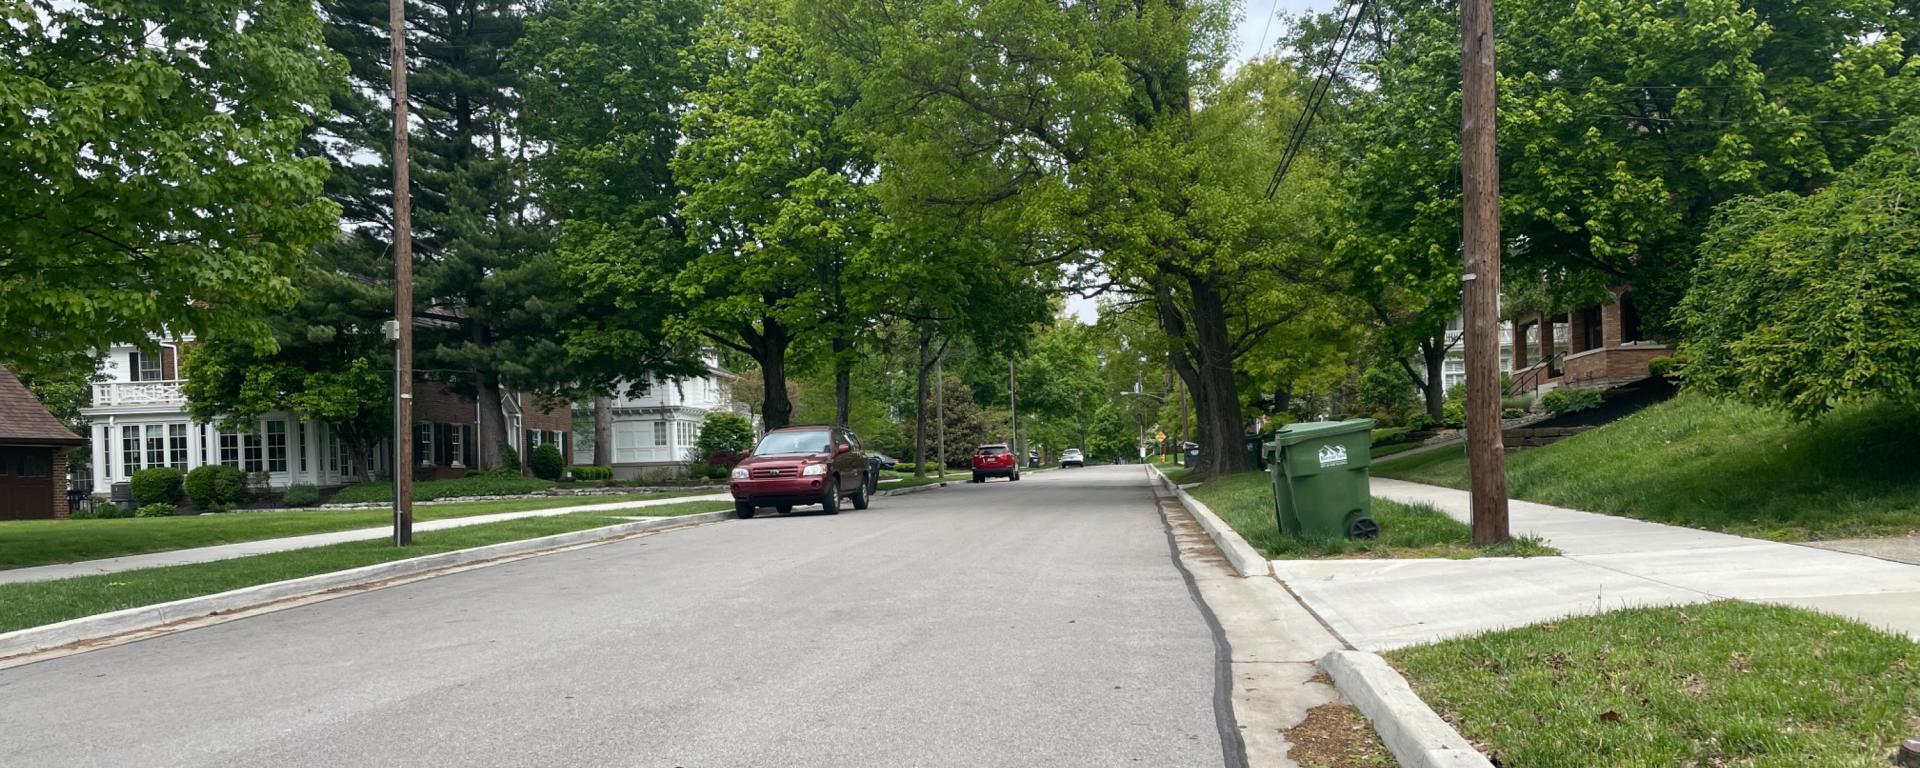 residential street with grass and sidewalks